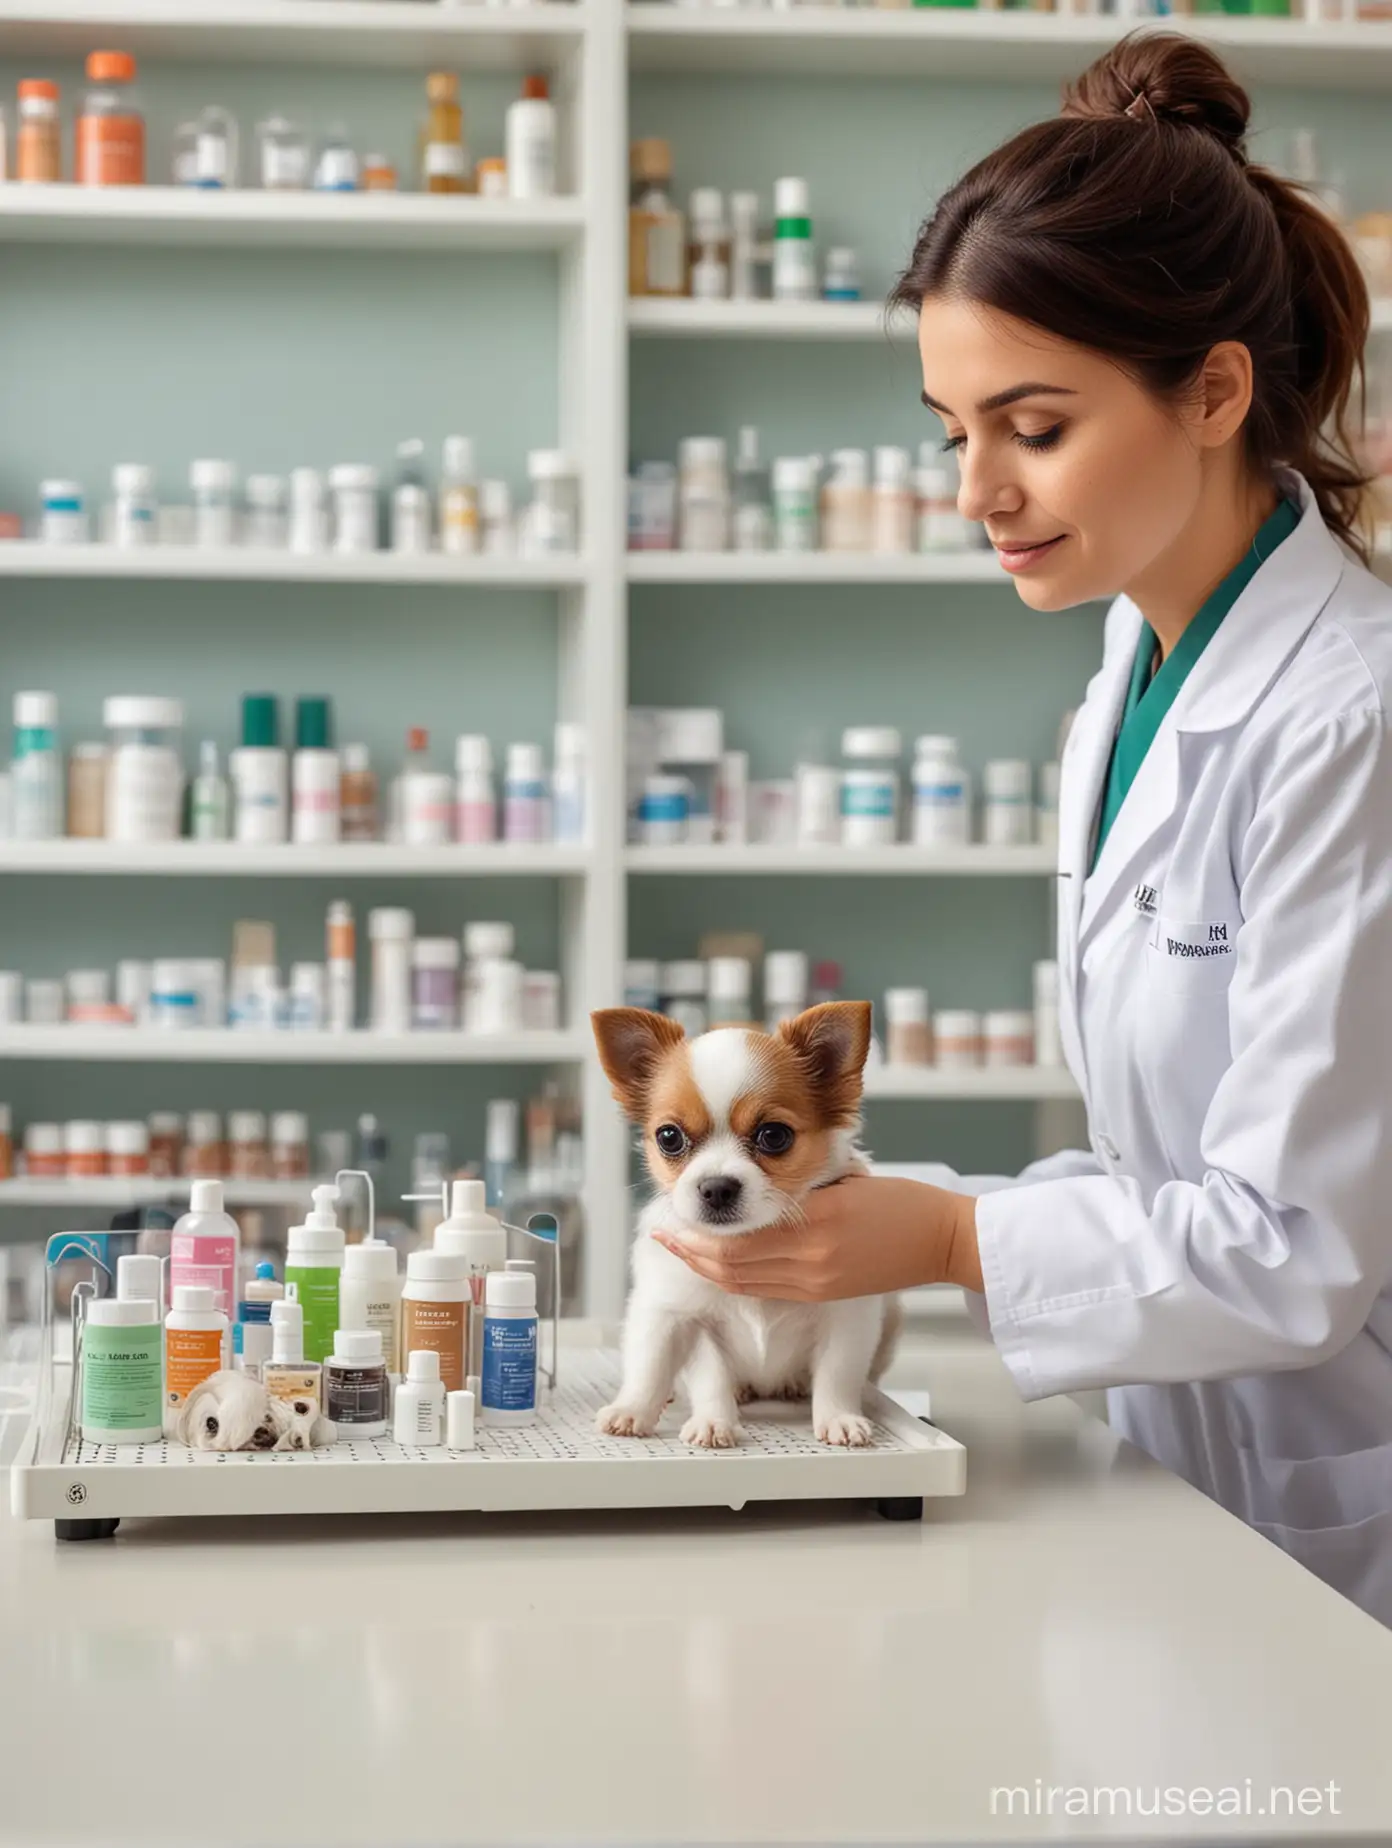 Veterinarian Examining Small Dog on Table with Pet Pharmacy Products